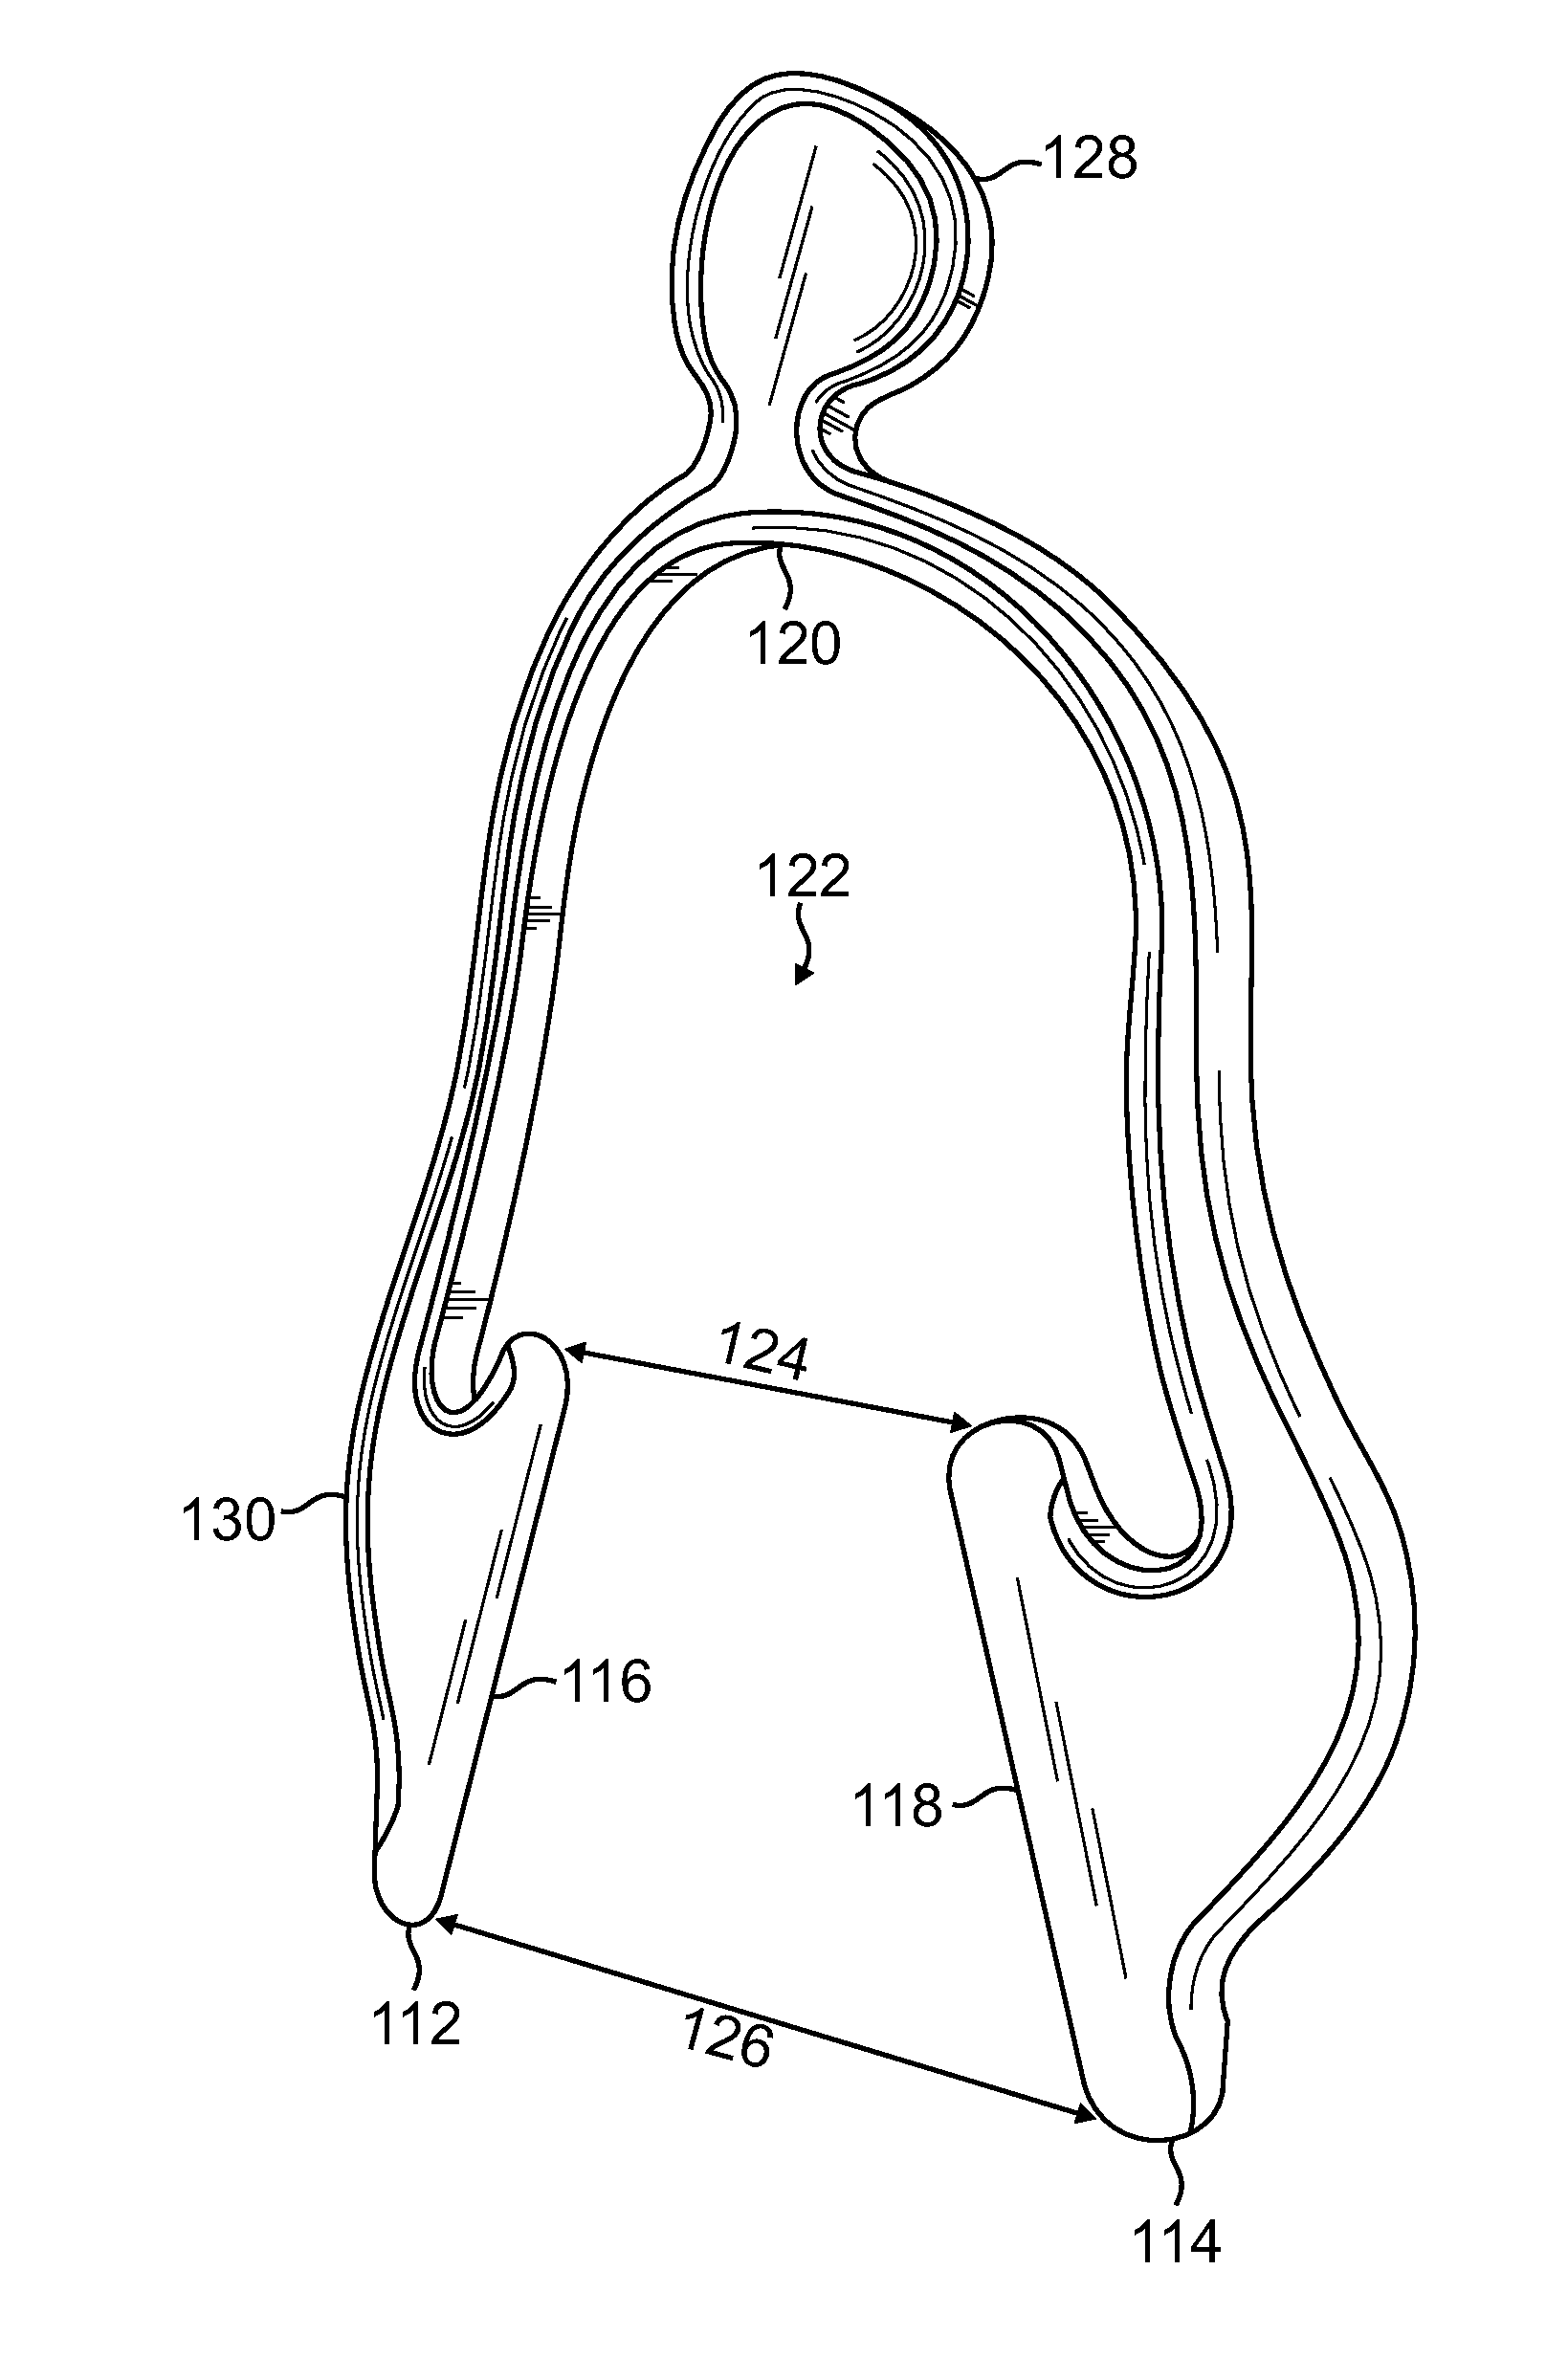 Apparatus and Method for Providing IV Access to the External Jugular Vein